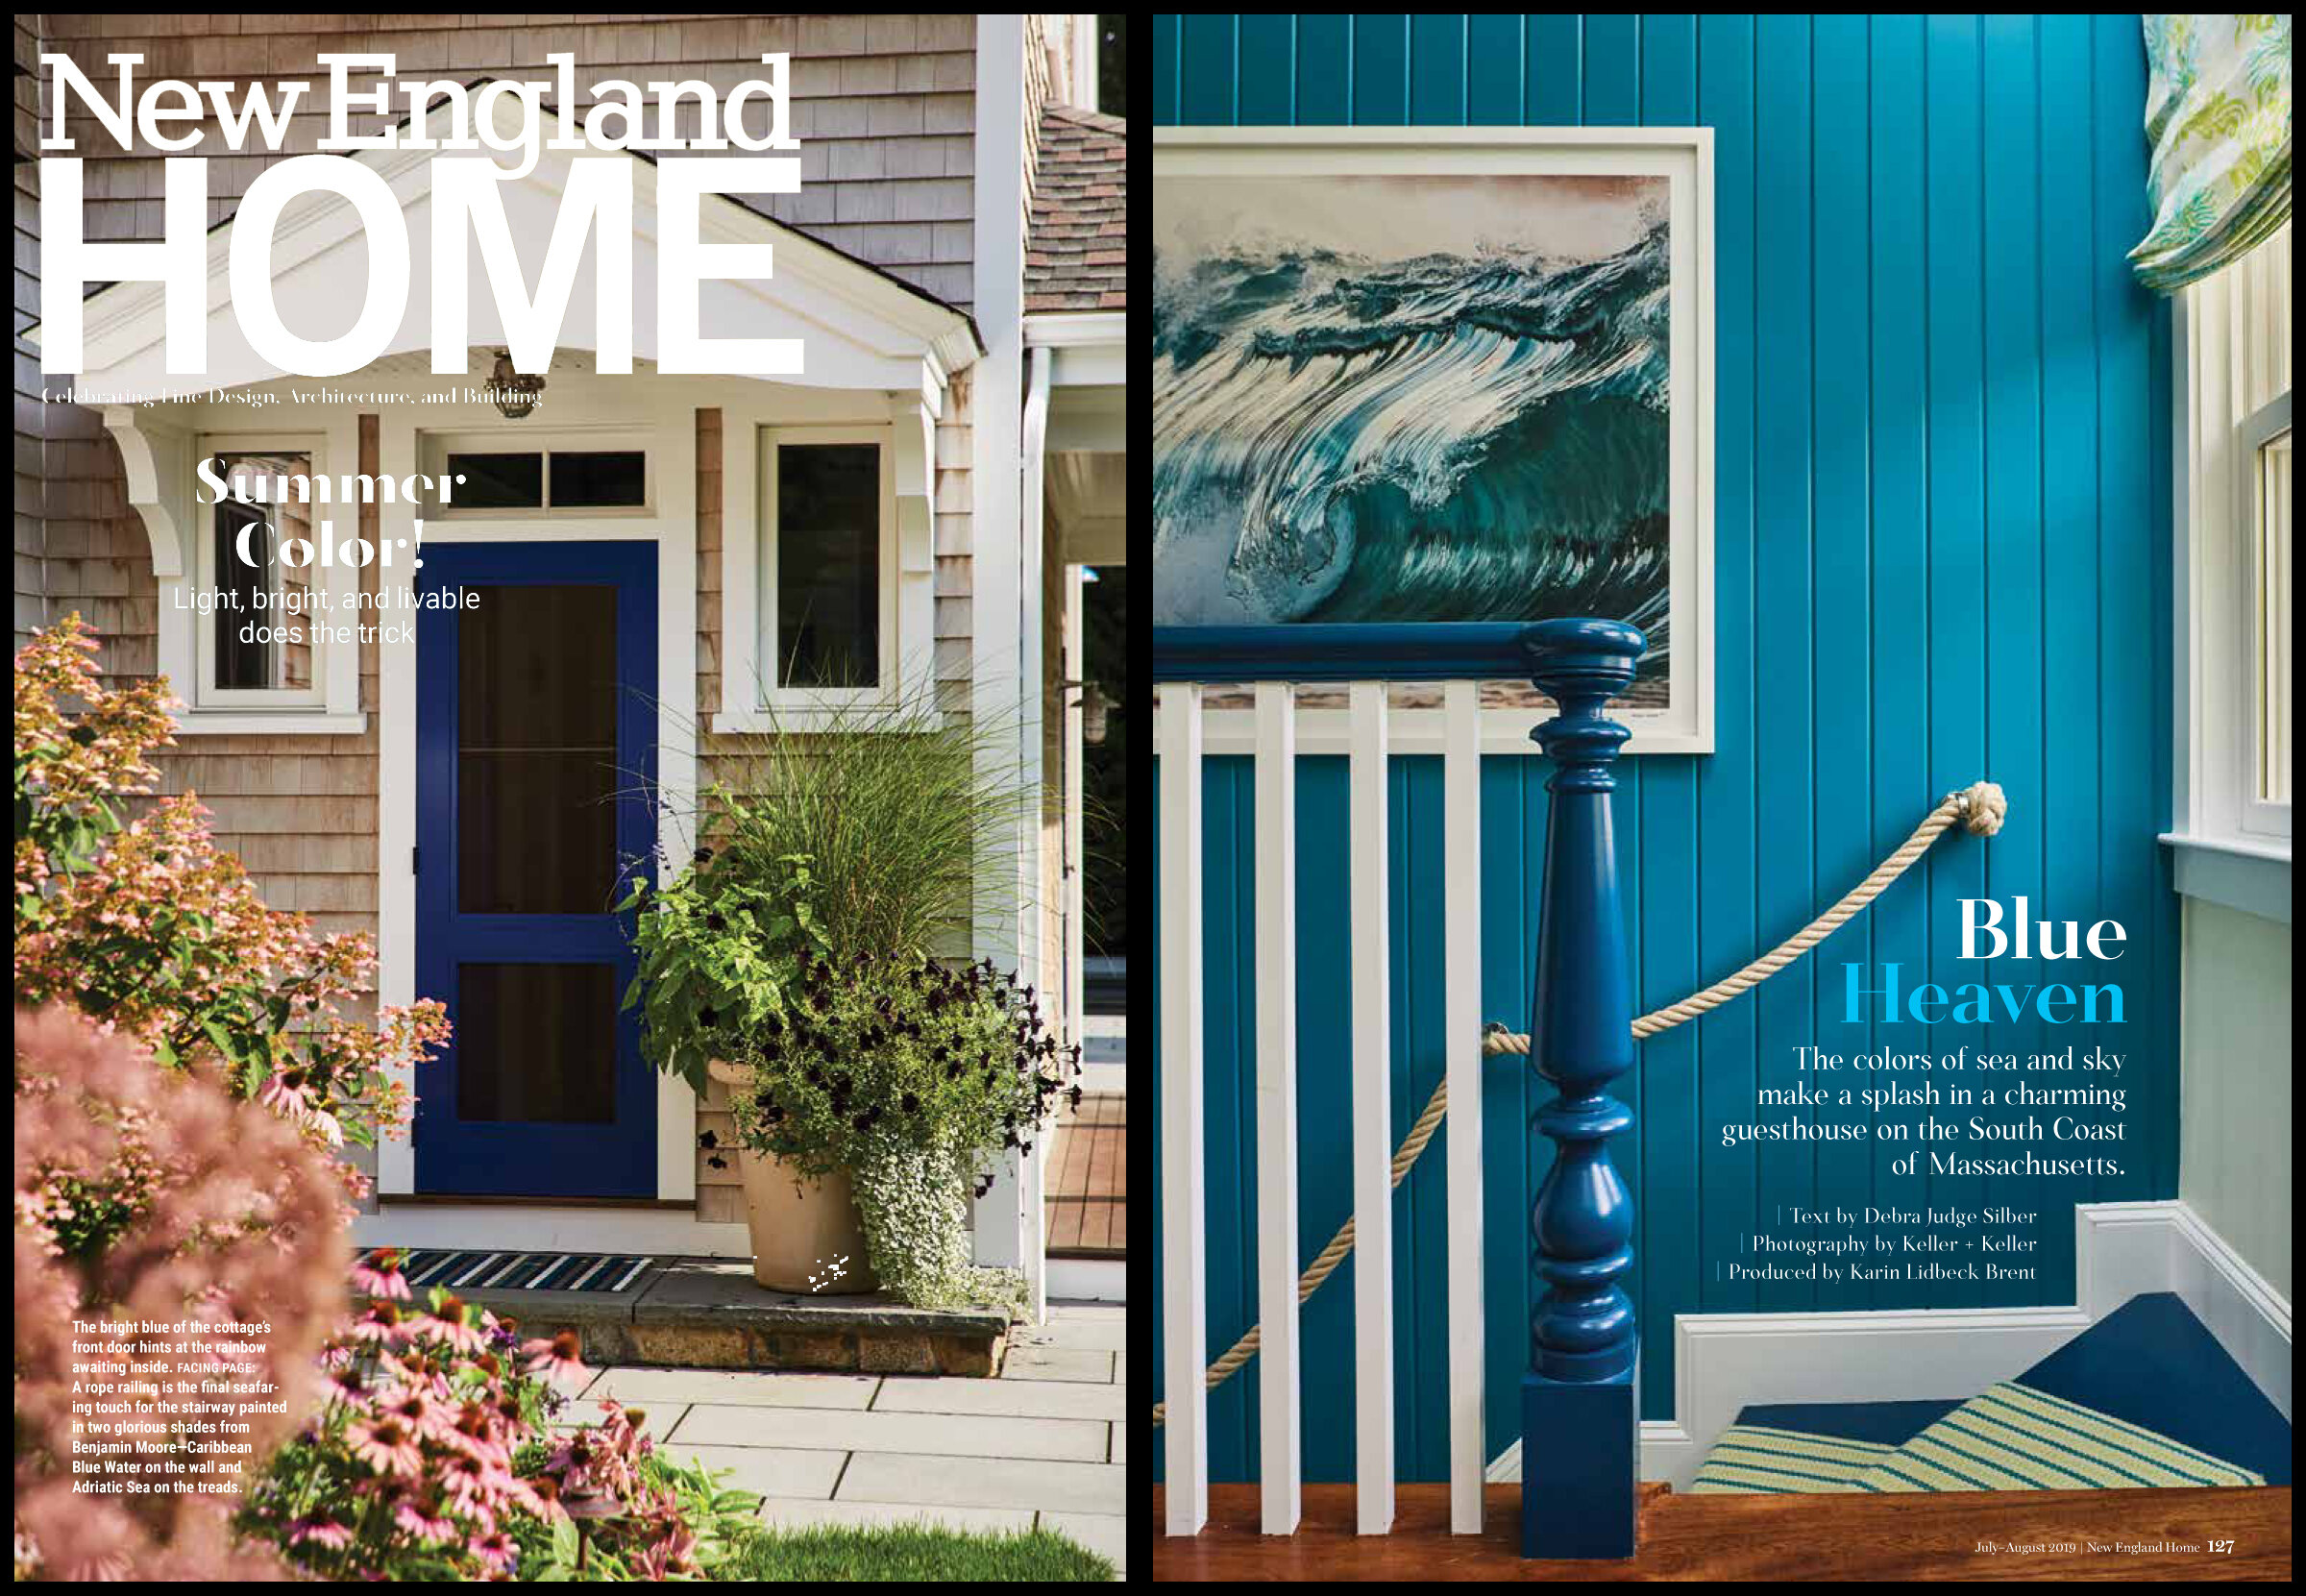 New England Home Article